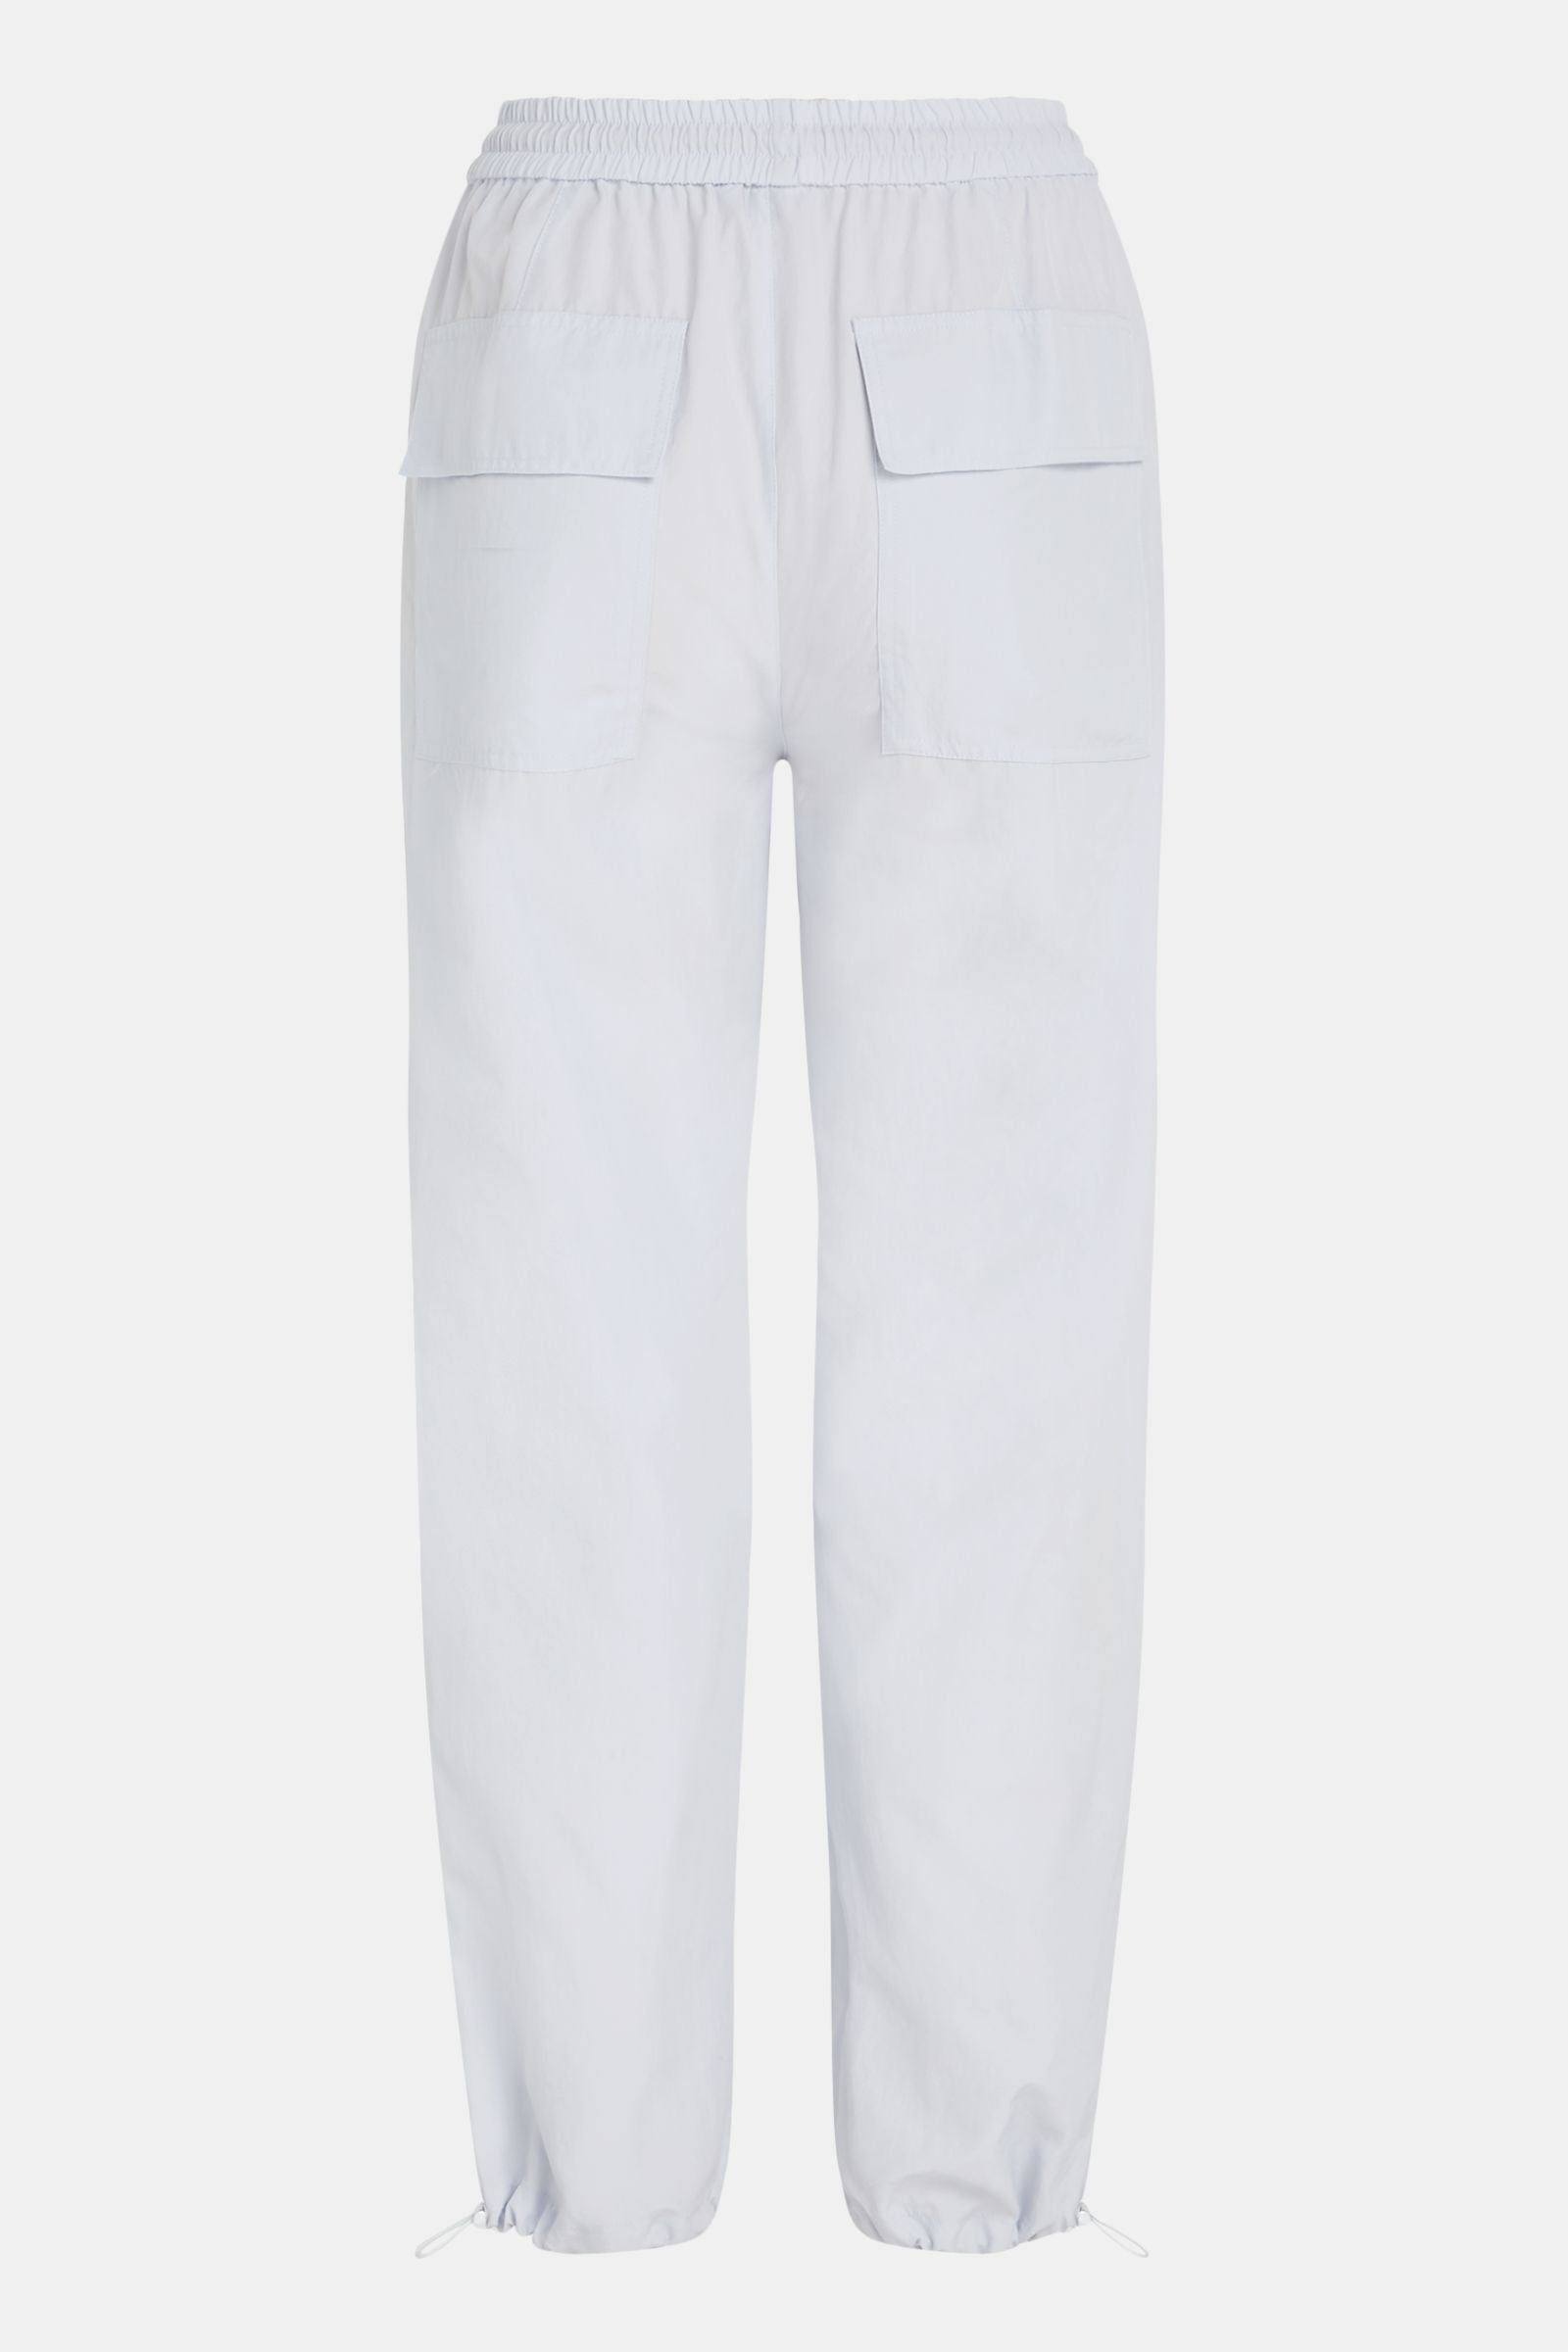 TROUSERS (S24C180) WATER